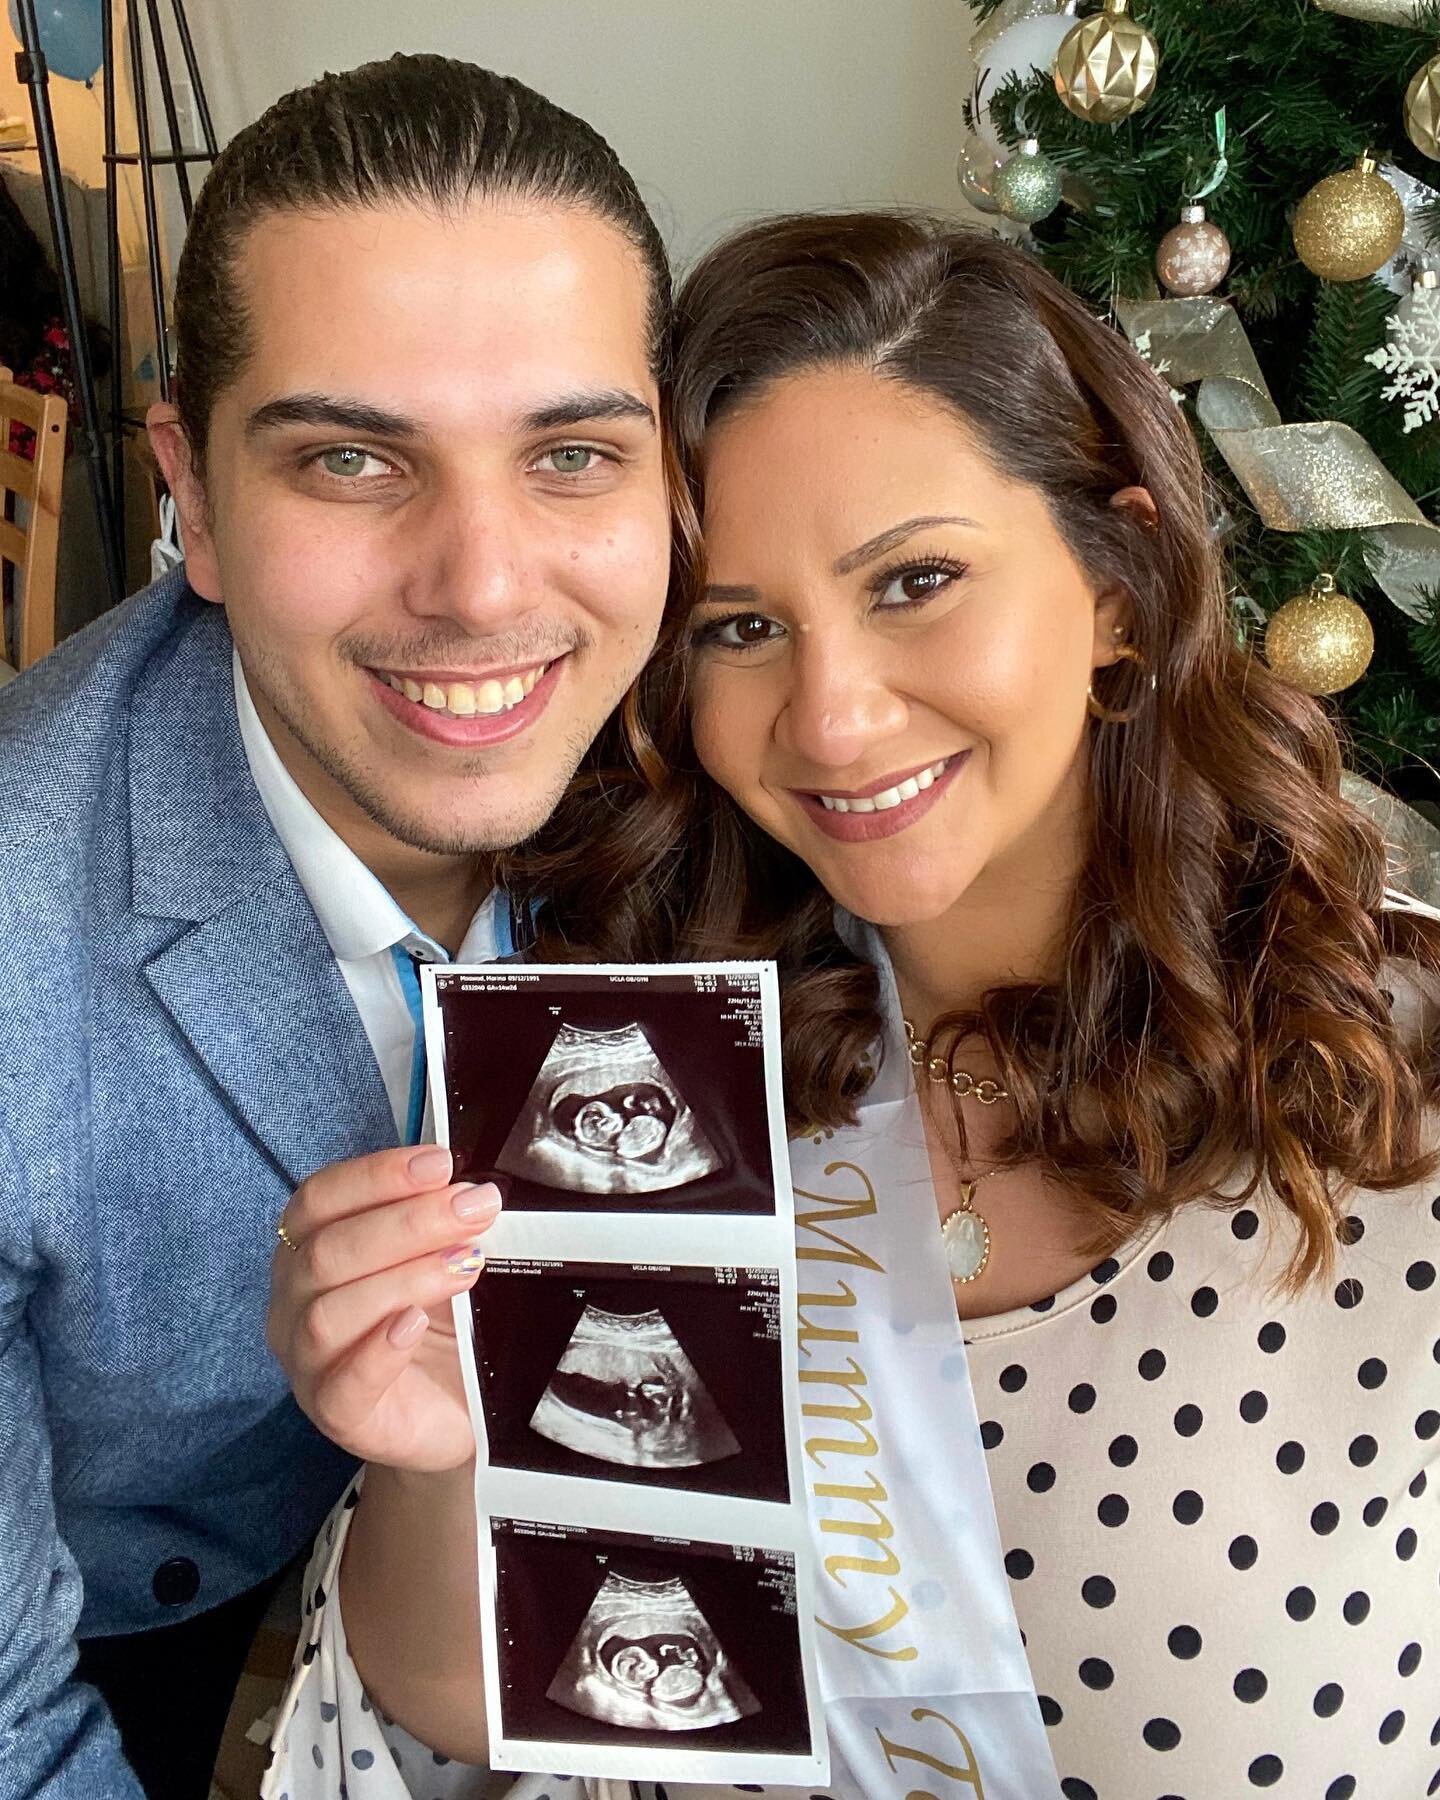 🎉🎉 Secret is out 🎉🎉
We are so excited to announce that we are expecting our first little bambino 😍

And Now you know why I haven&rsquo;t been posting 😂

I want to take this moment to say thank you for all your messages asking about me and check